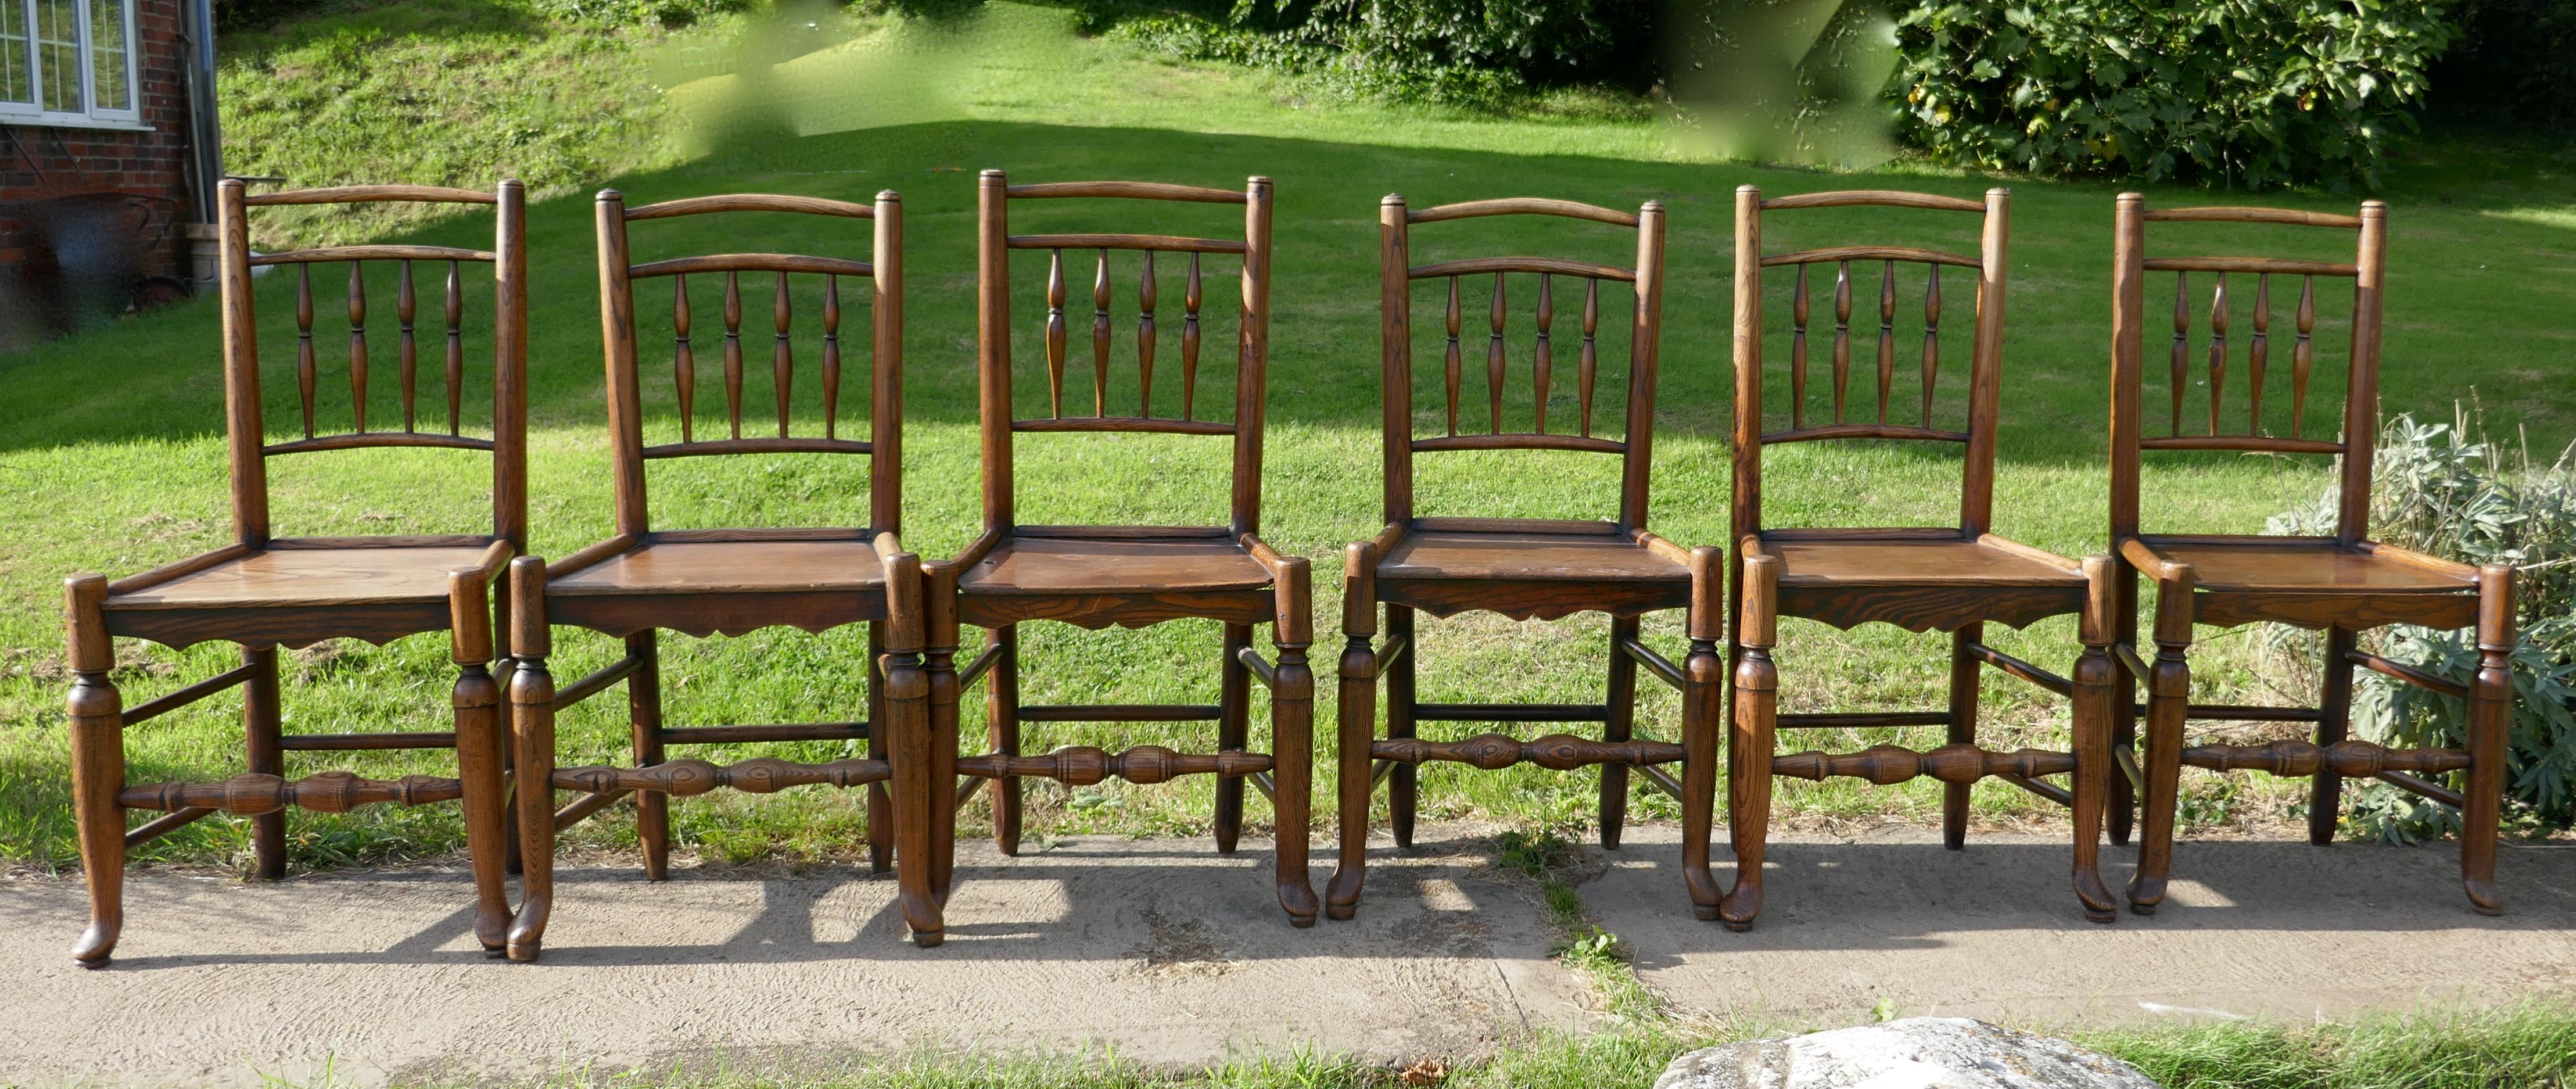 Set of 6 early 19th century elm and ash country chairs

This a great find, we have a set of these charming antique west midlands chairs, they all have elm plank seats and with spindled backs

The chairs are sound, some of them show signs of old